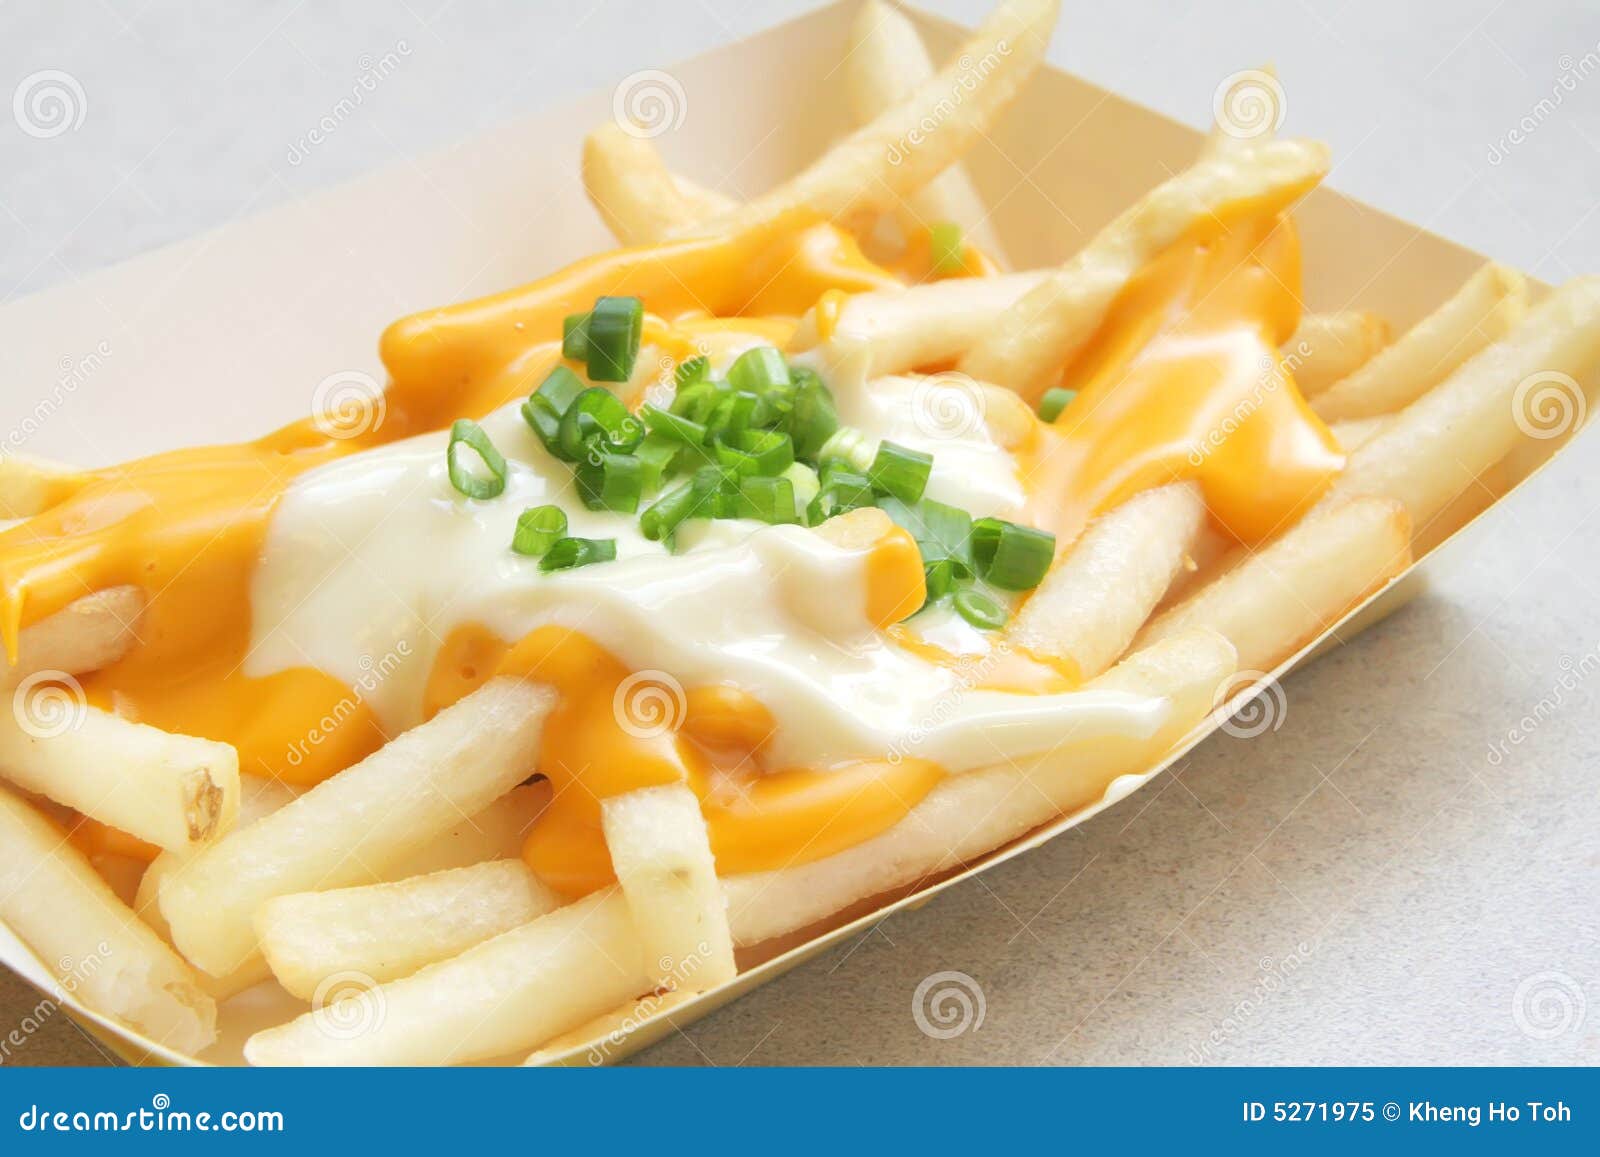 french fries with melted cheese